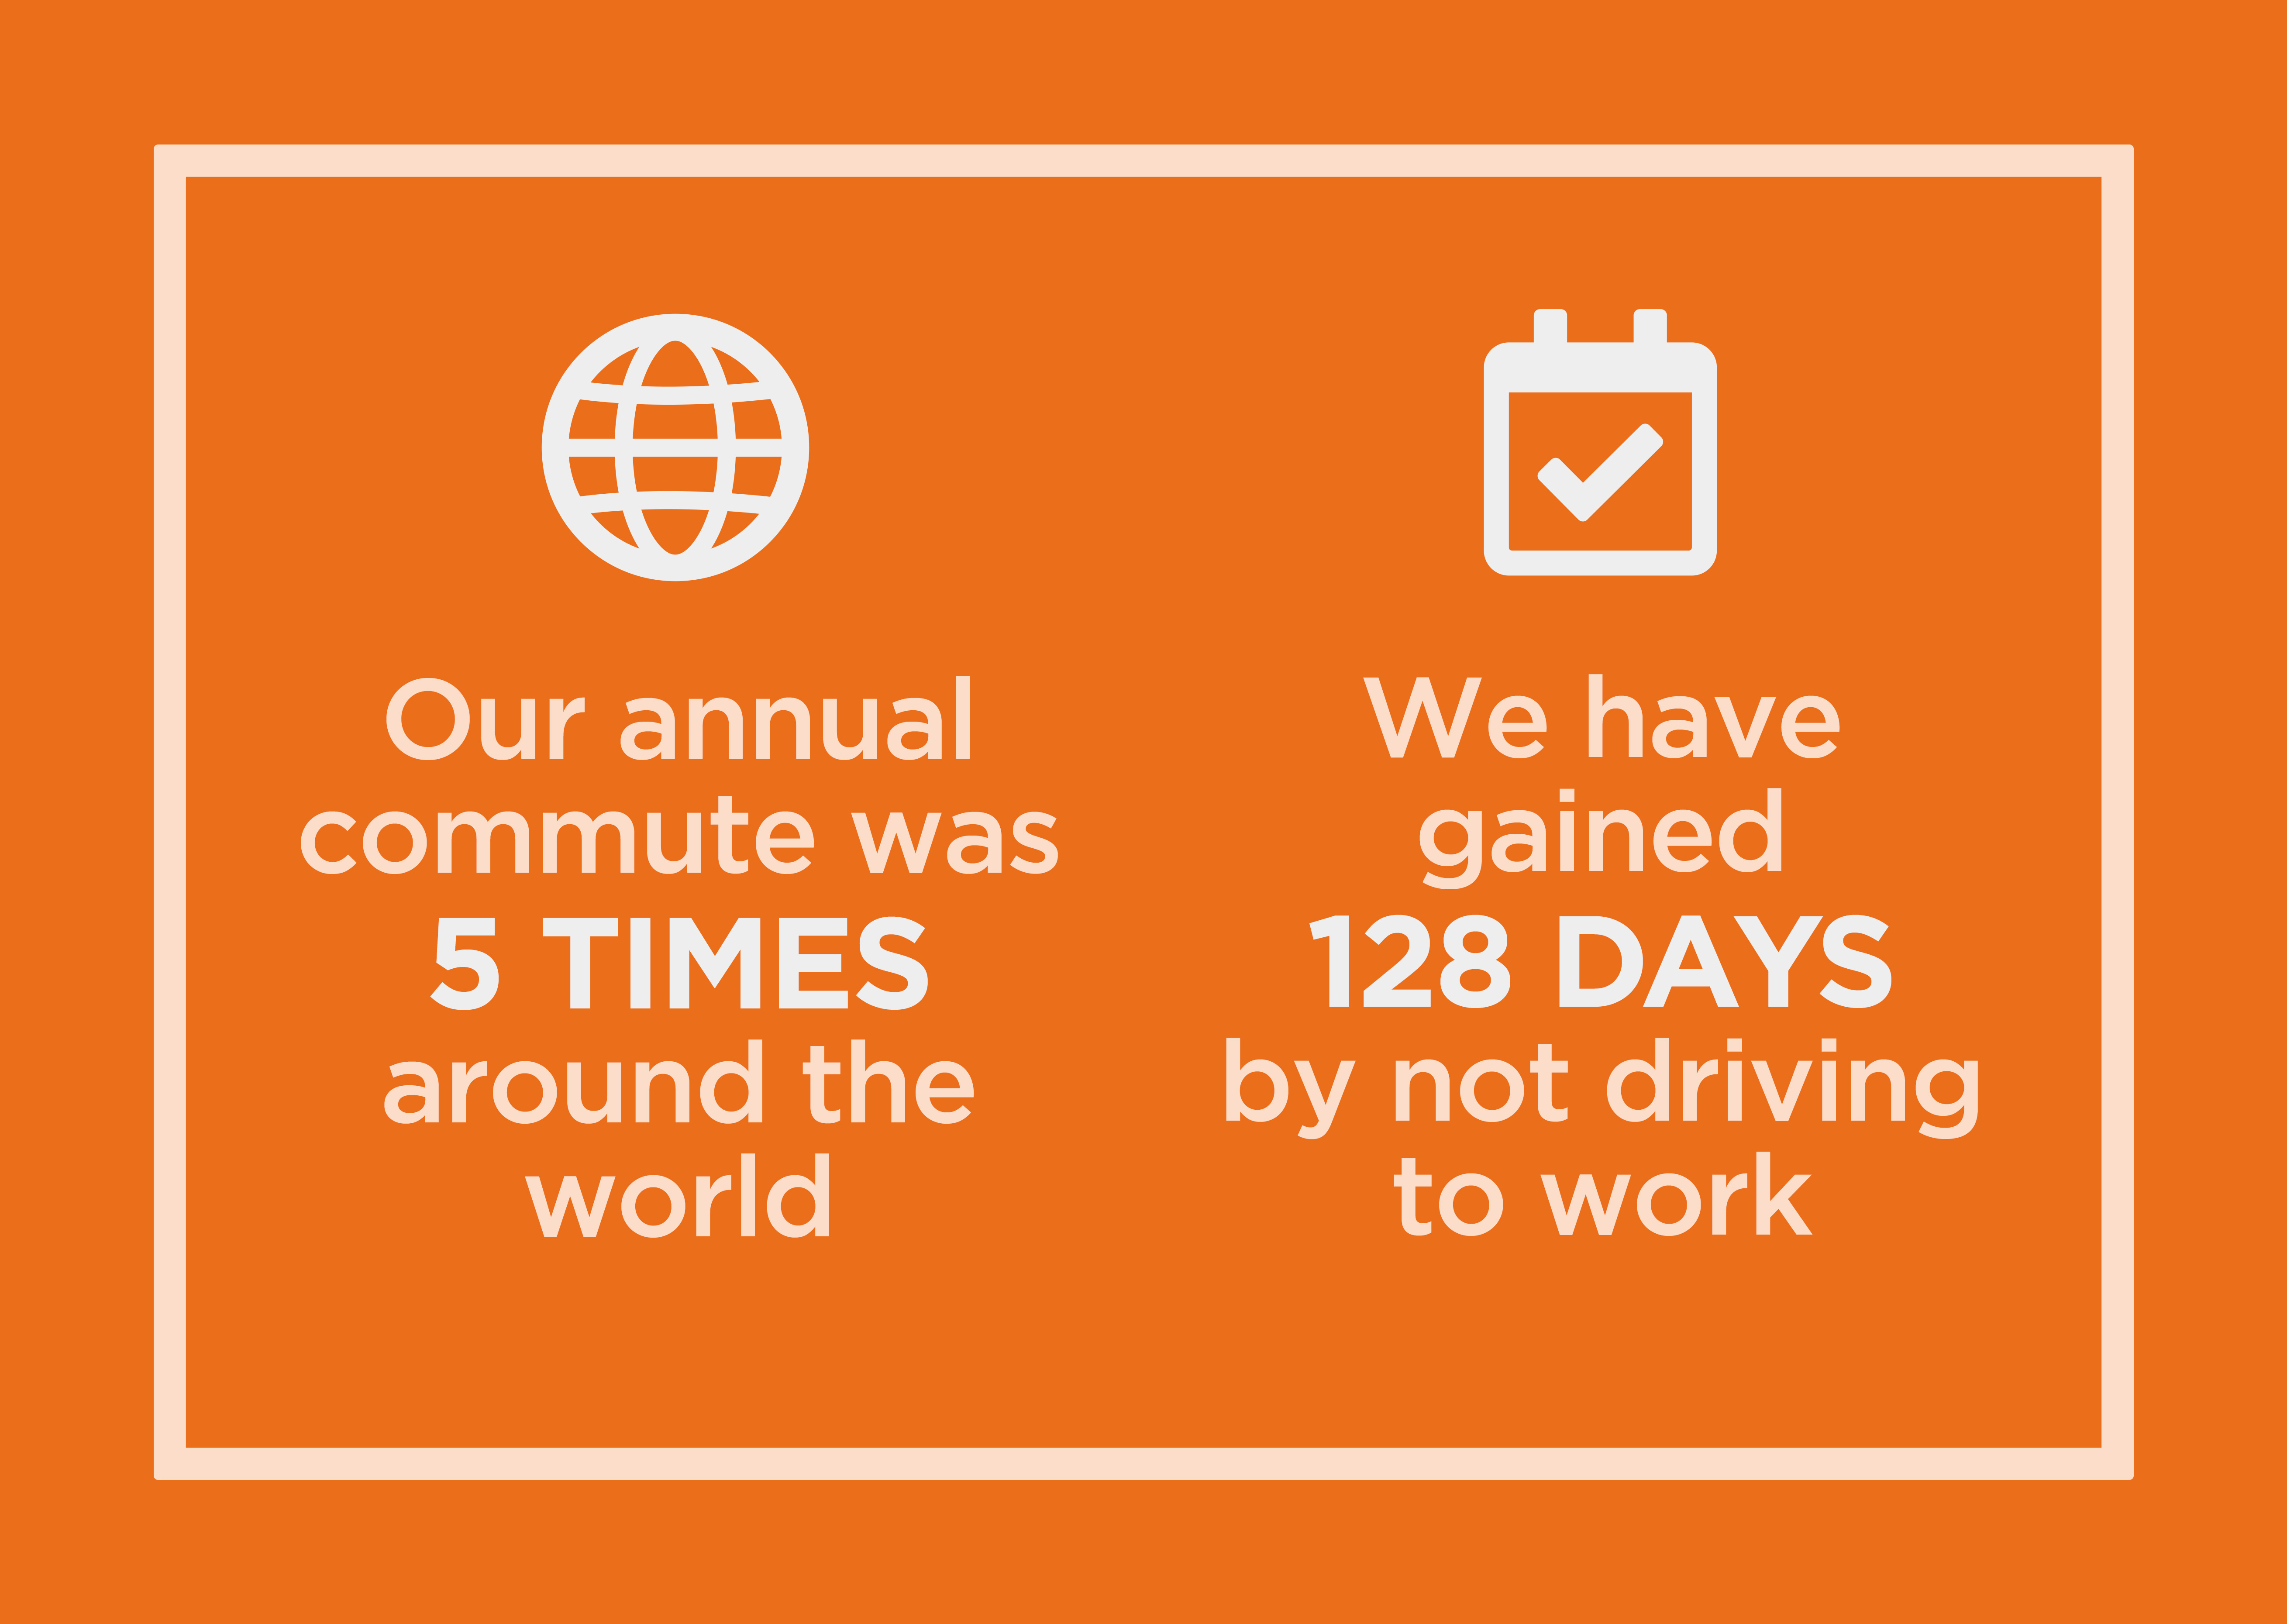 Our annual commute was 5 times around the world and we have gained 128 days by not driving to work.